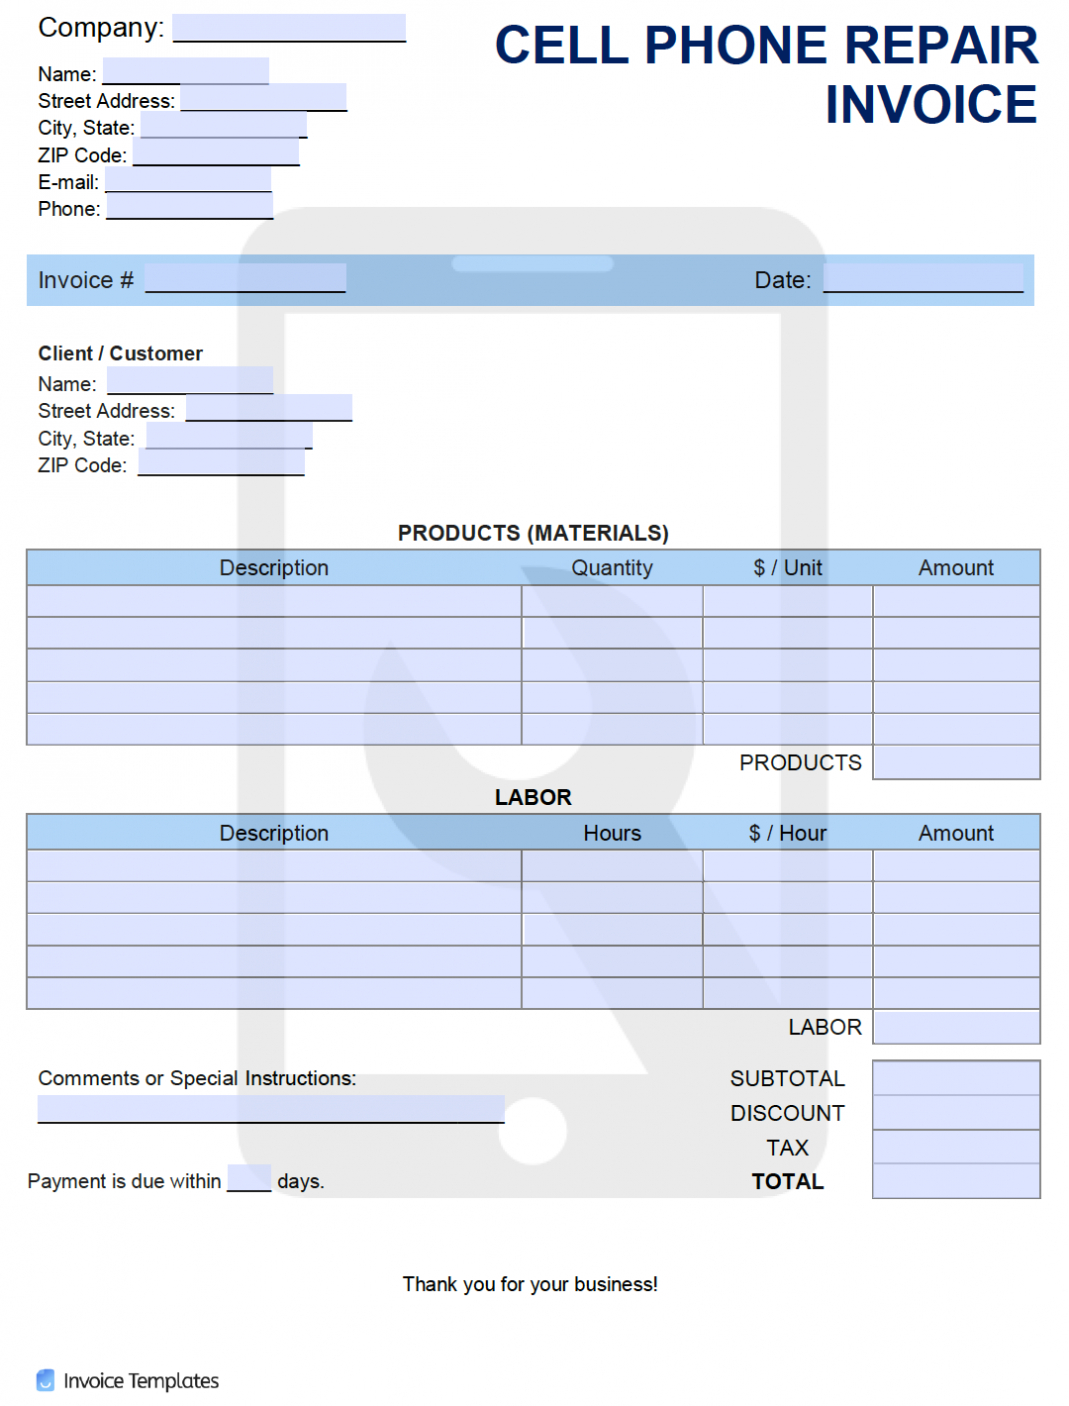 Free Cell Phone Repair Invoice Template | Pdf | Word | Excel inside Cell Phone Repair Invoice Template